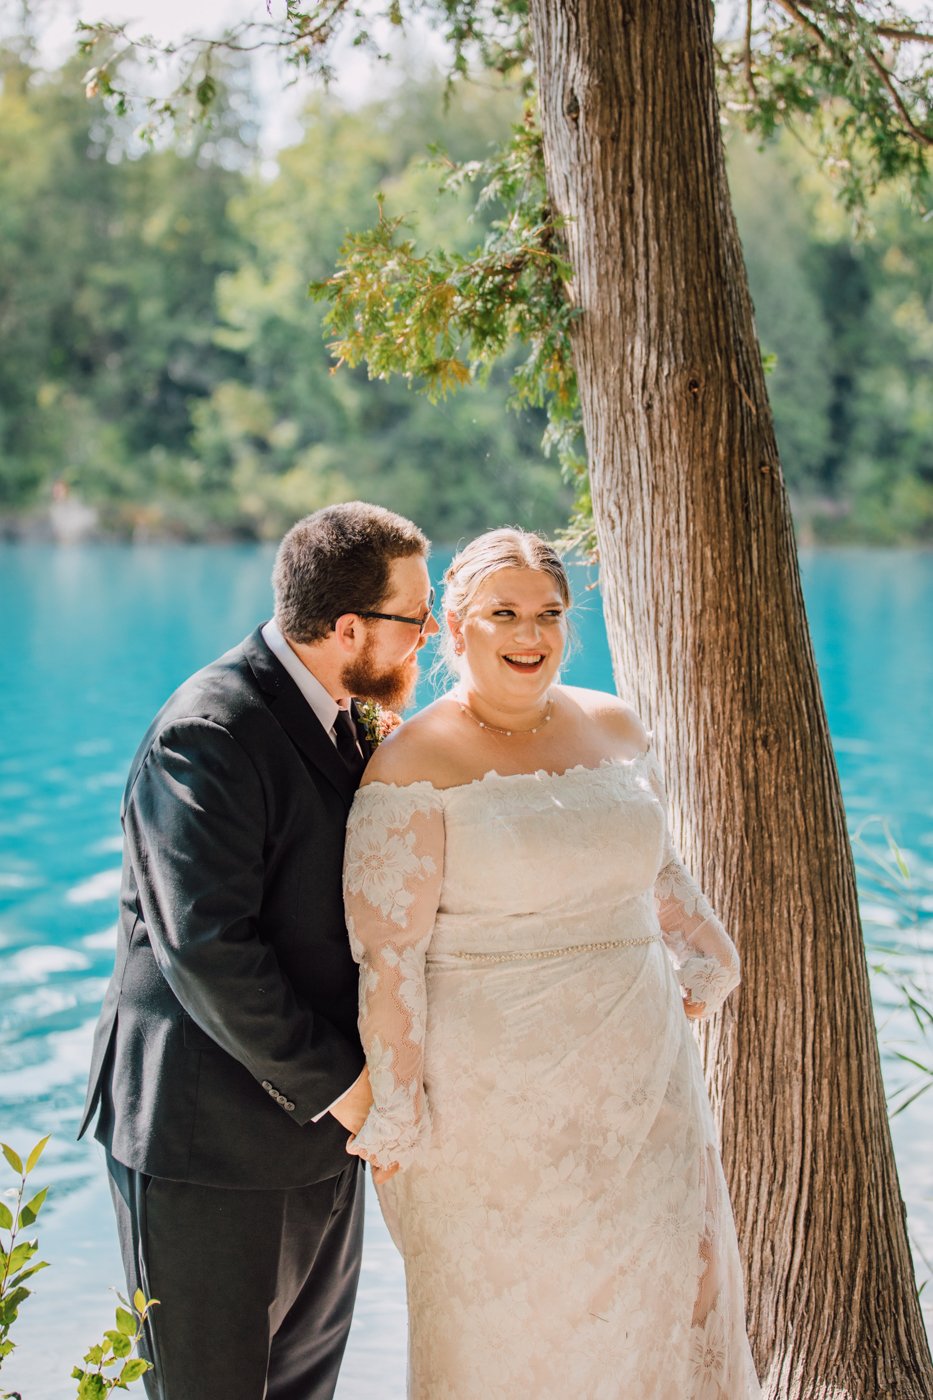  Bride and Groom pose for wedding photos during their lakeside wedding at Green Lakes State Park 